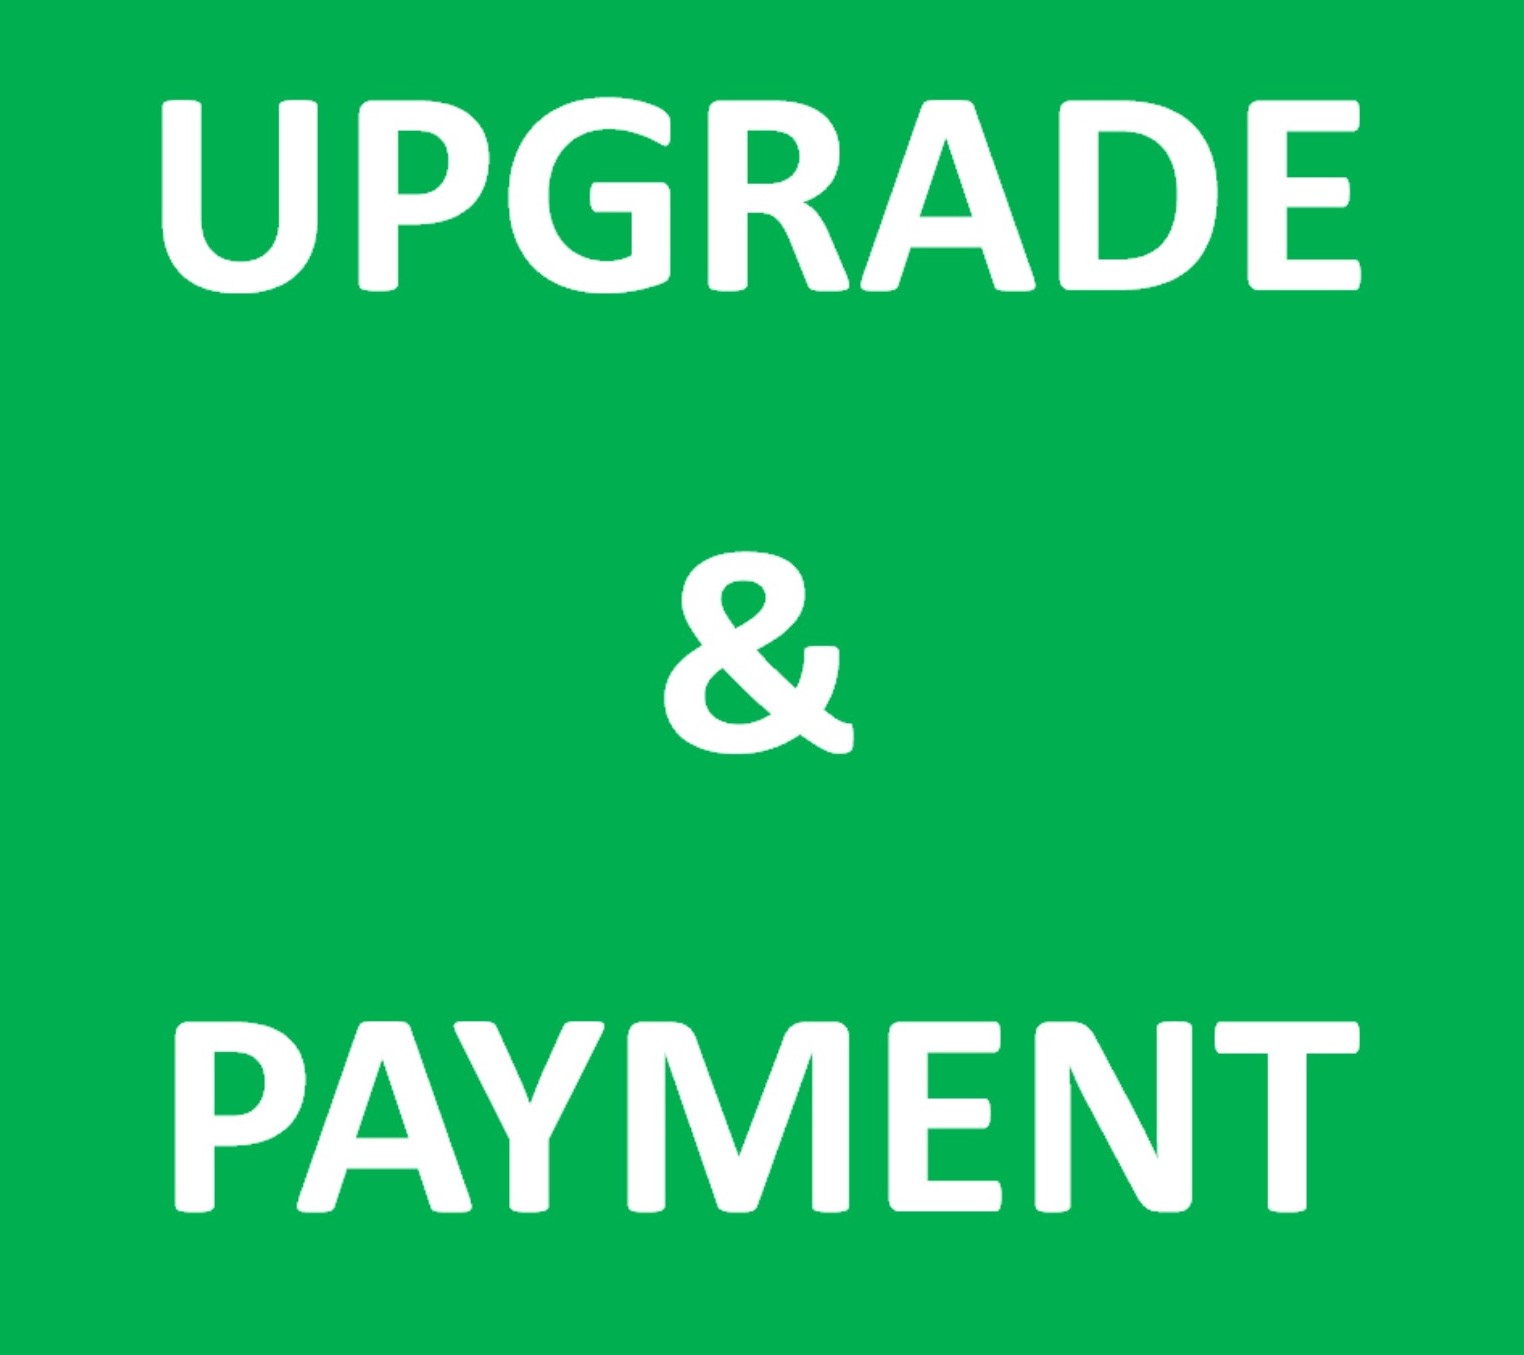 Upgrades and Payments